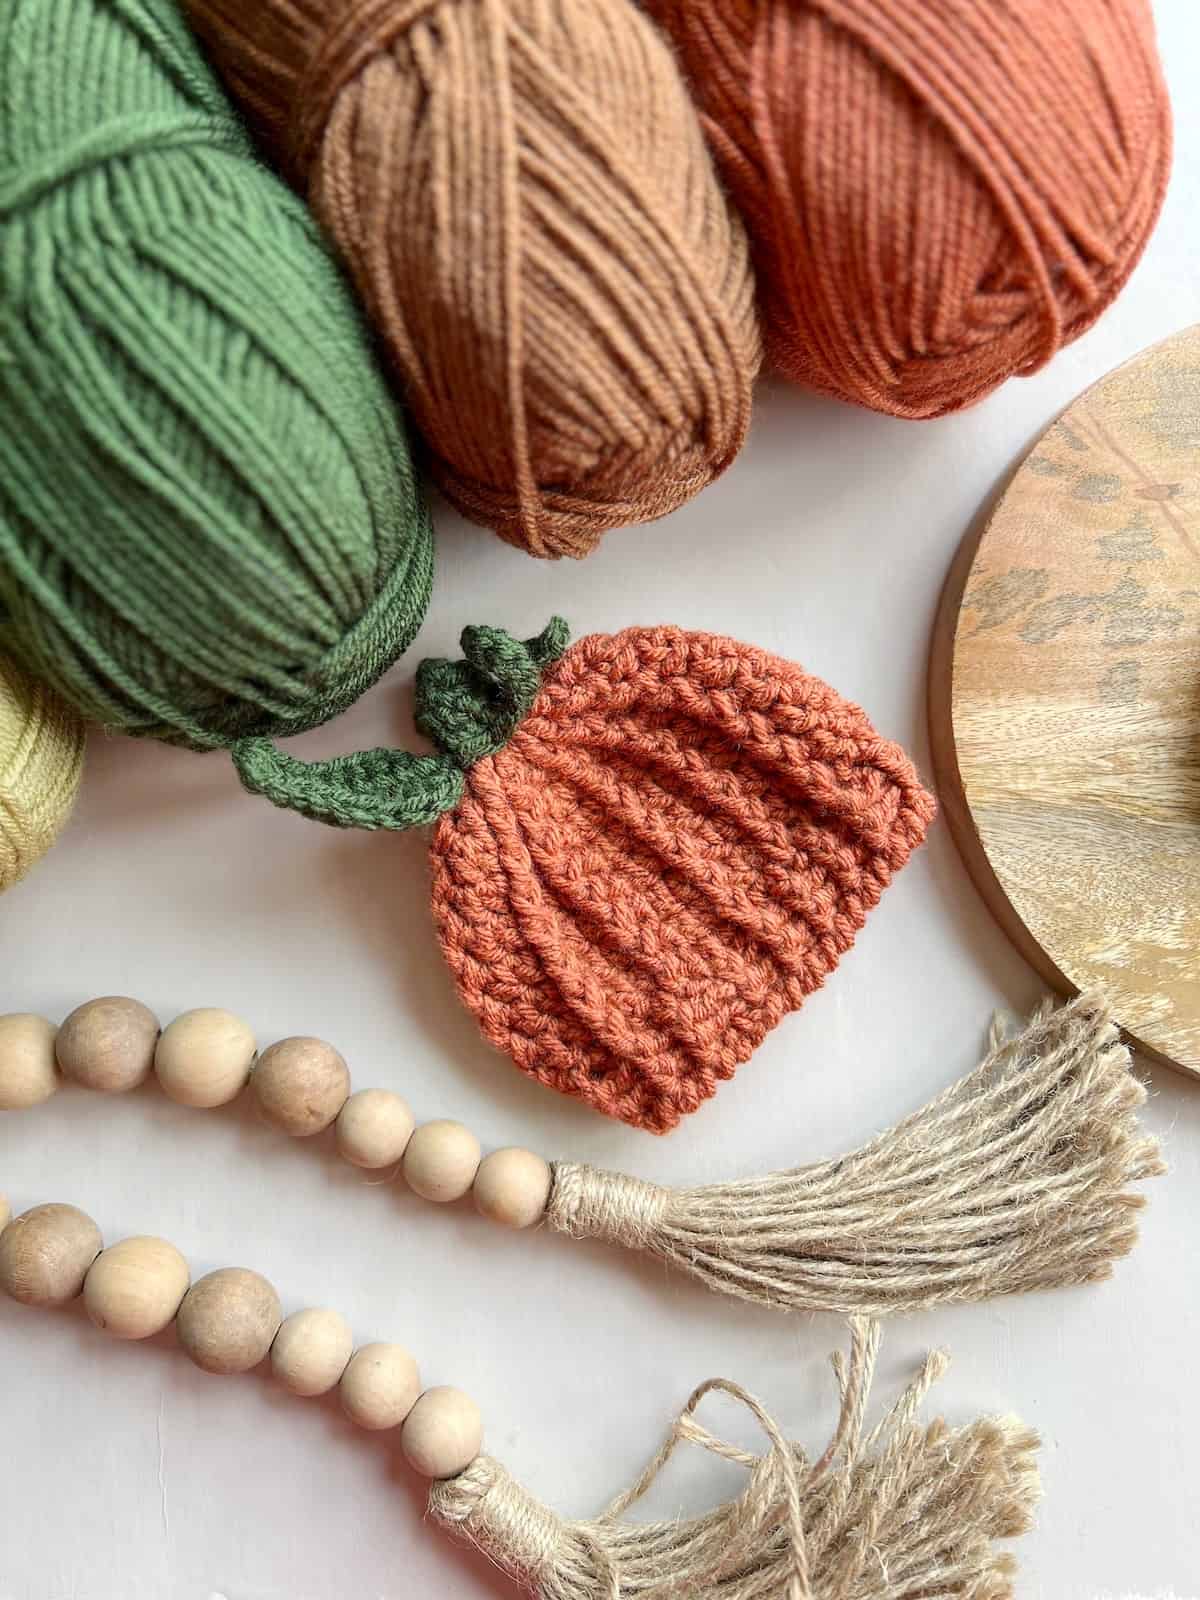 Cute crochet pumpkin hat with leaf and stalk on top.